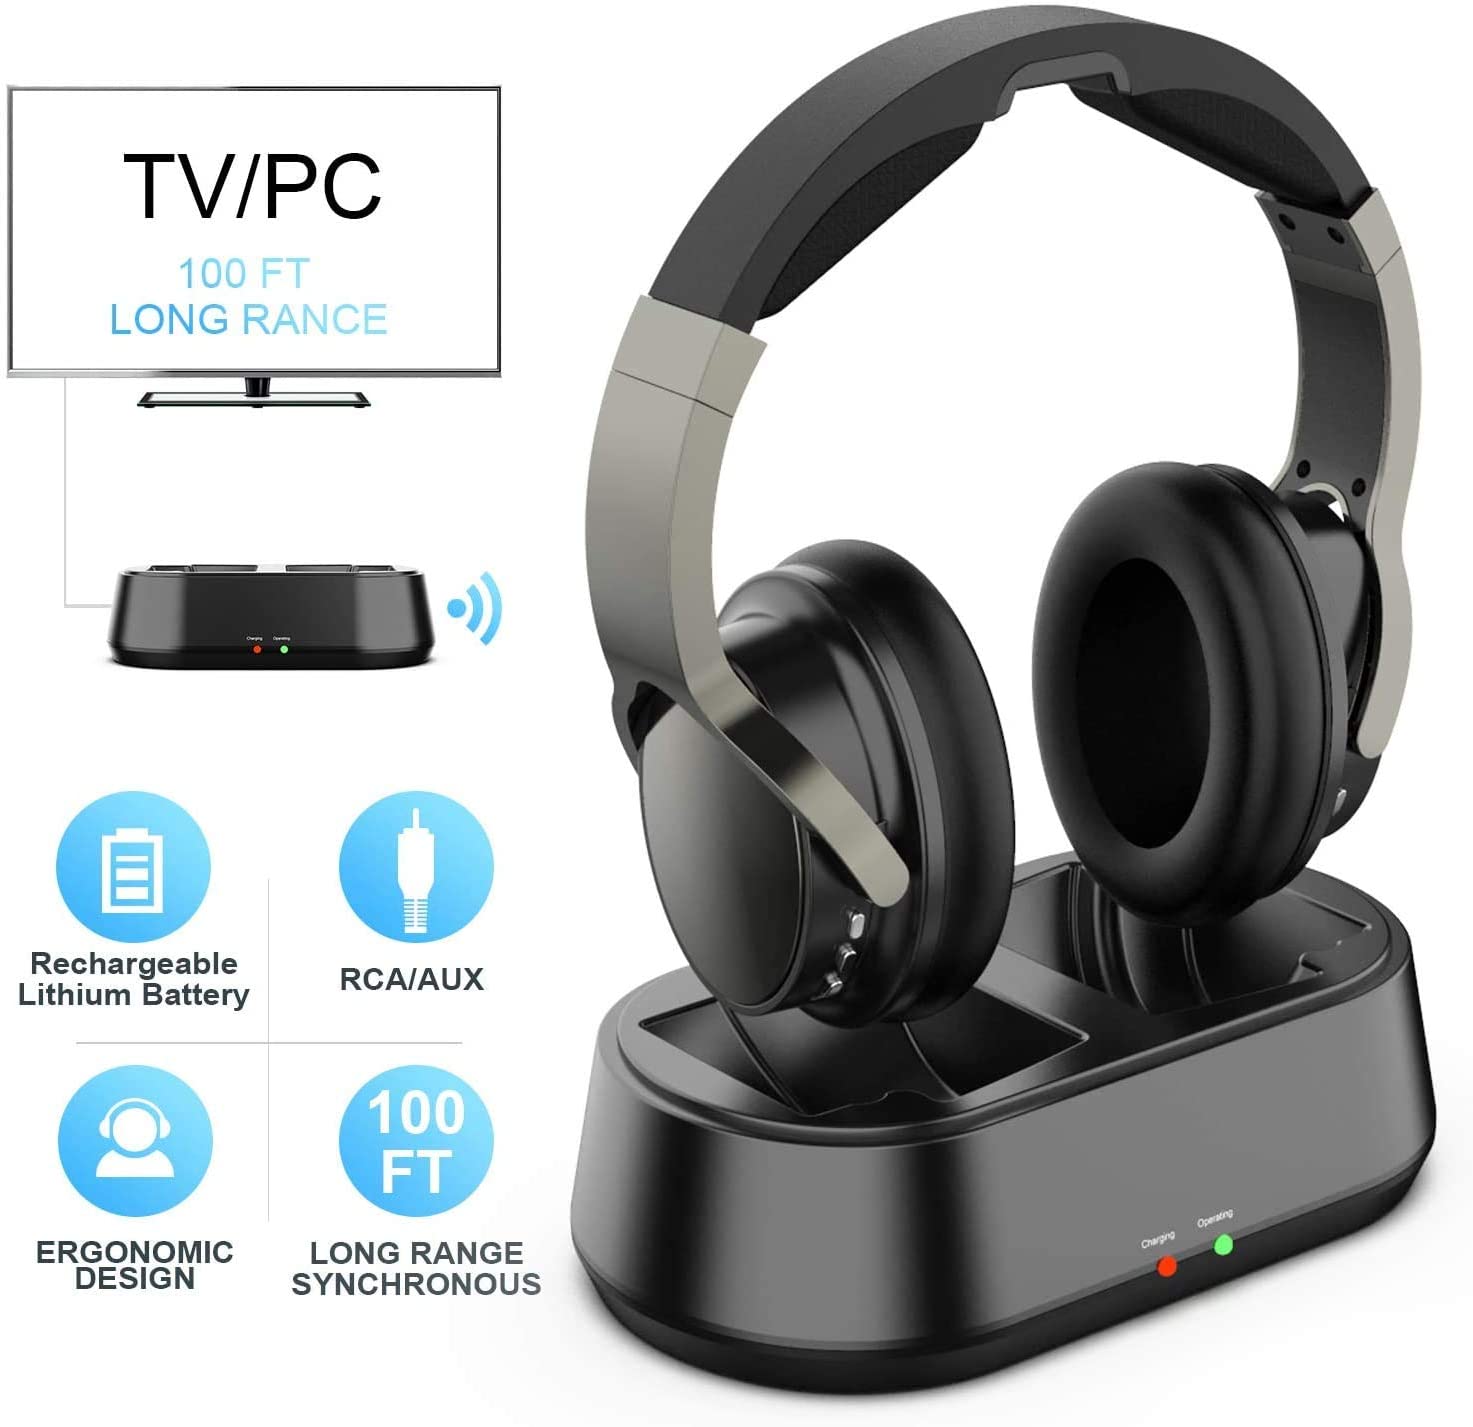 Rybozen Wireless TV Headphones with Transmitter Dock, Over-Ear Cordless Headset with RCA / 3.5MM Input, for Watching Home Television Game 100 Feet Play Range